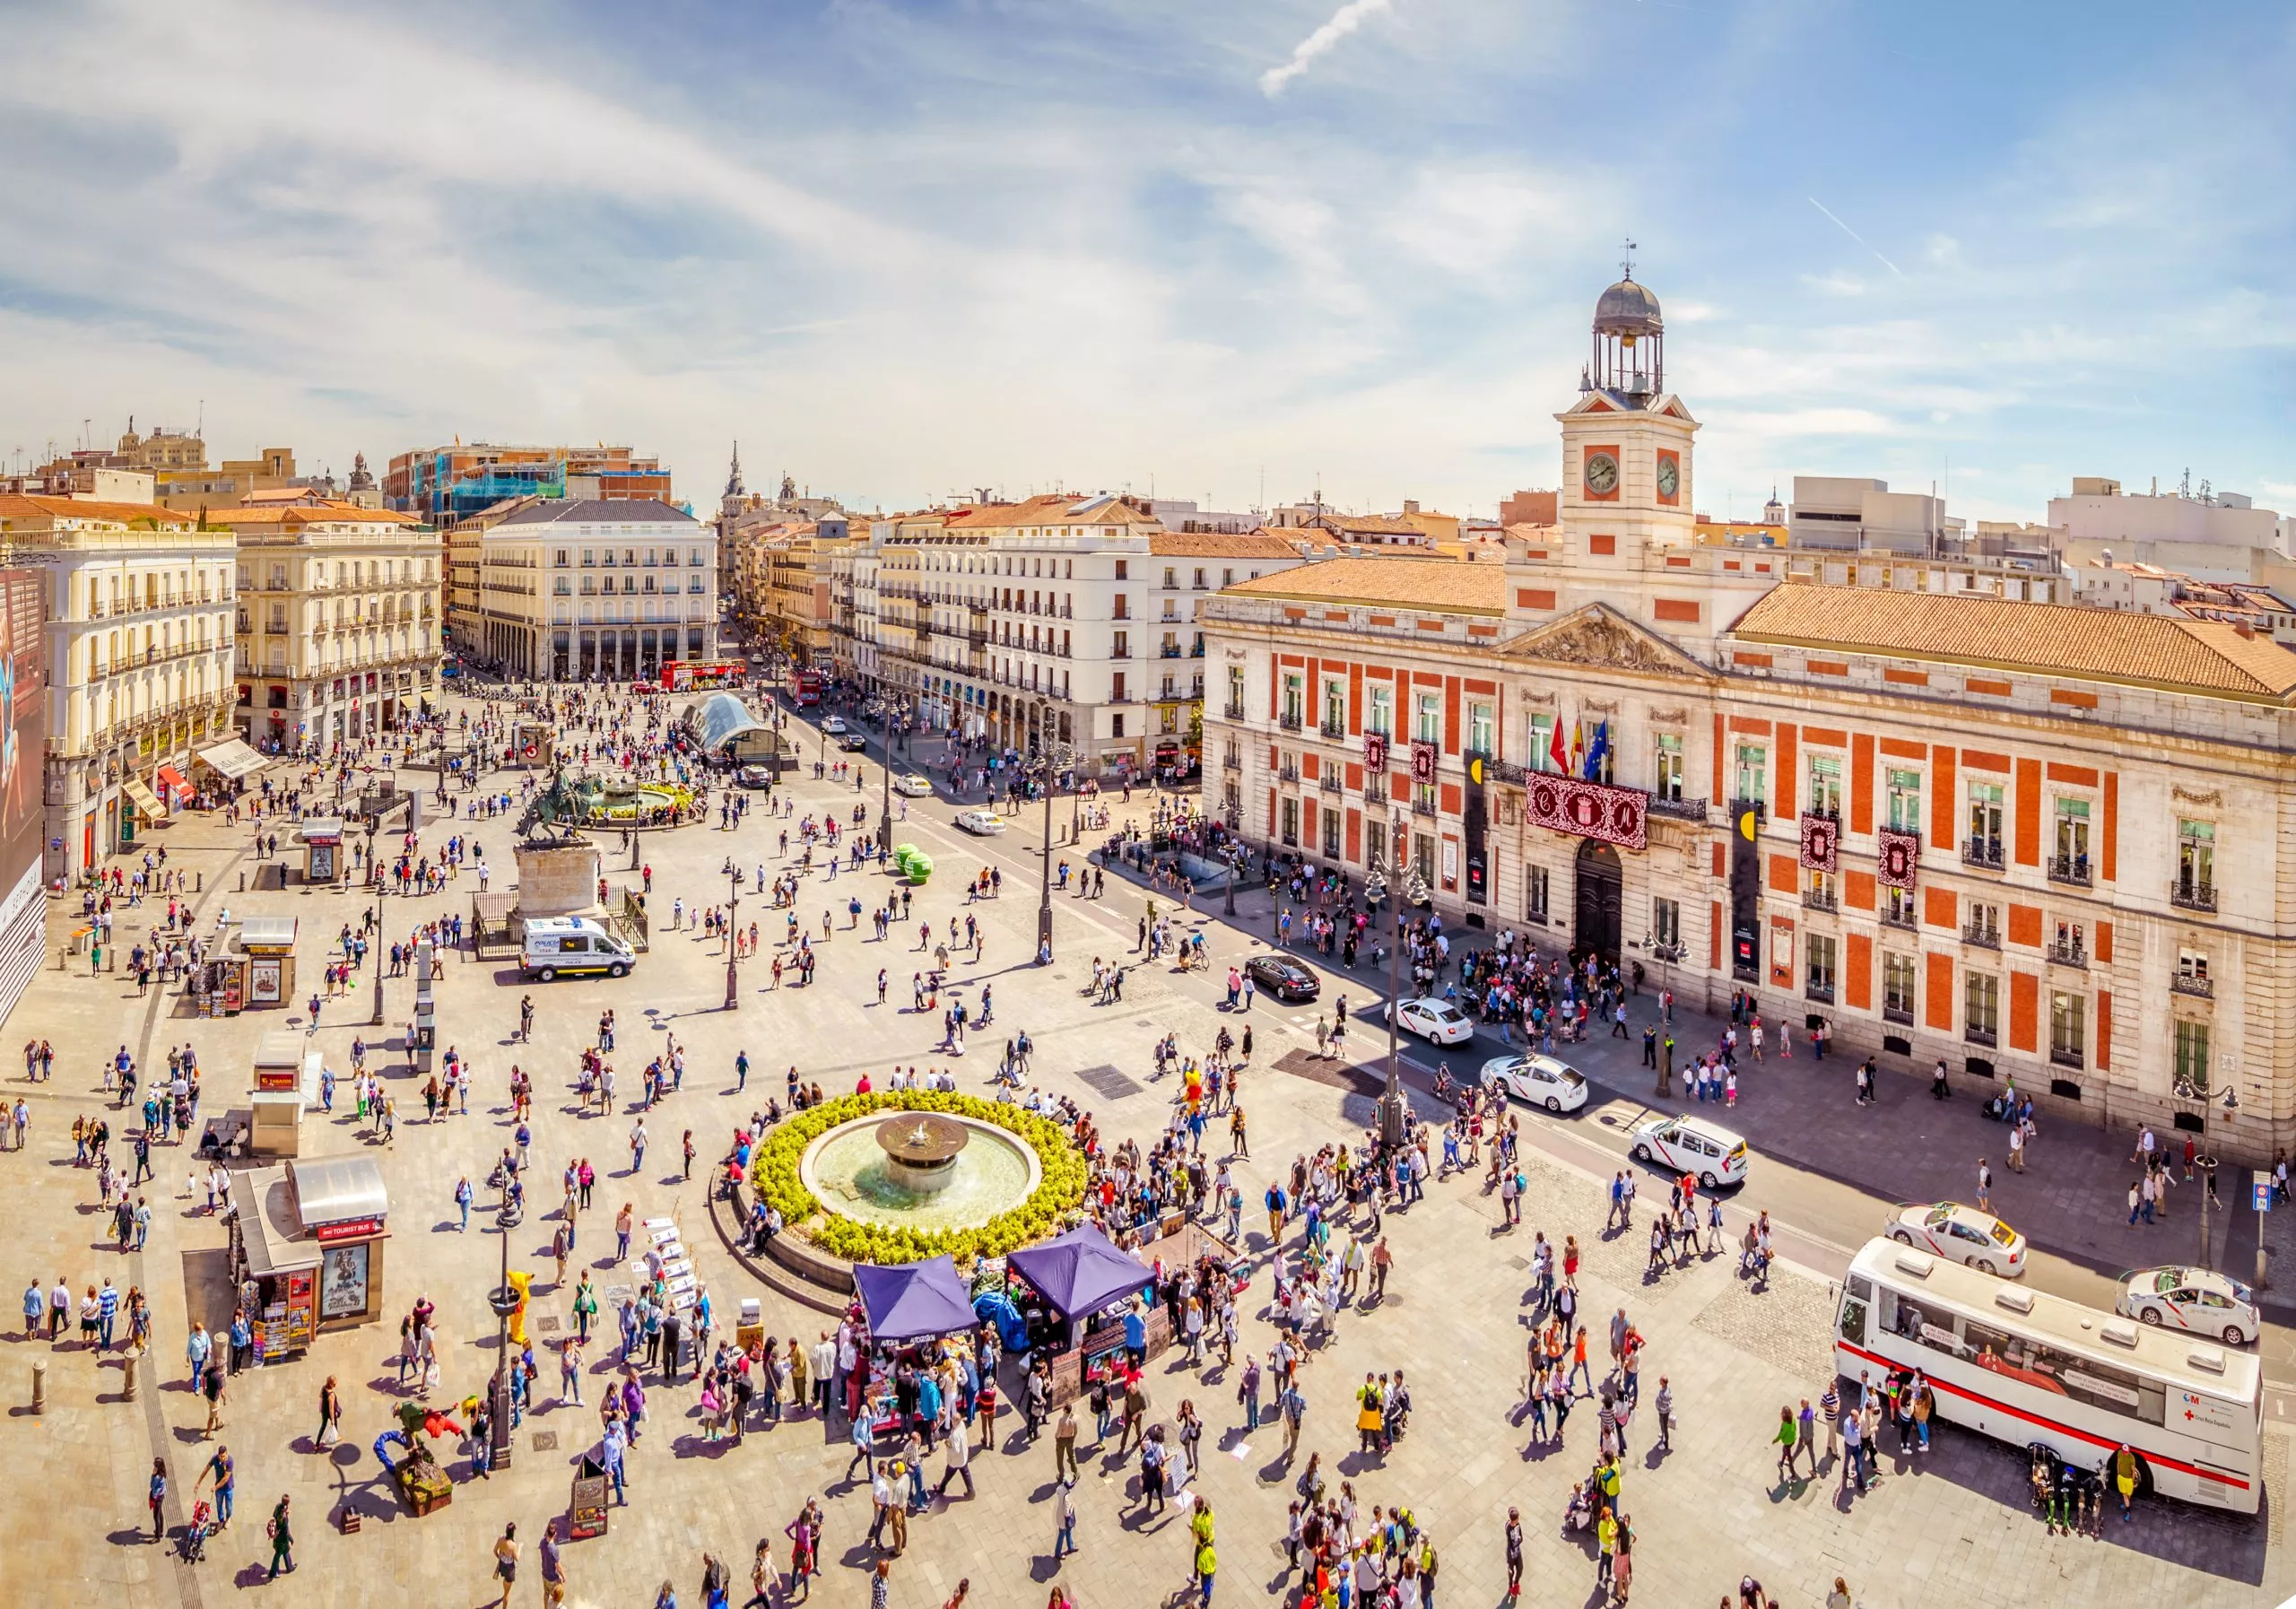 The Puerta del Sol square is the main public square in the city of Madrid, Spain. In the middle of the square is located the office of the President of the Community of Madrid.